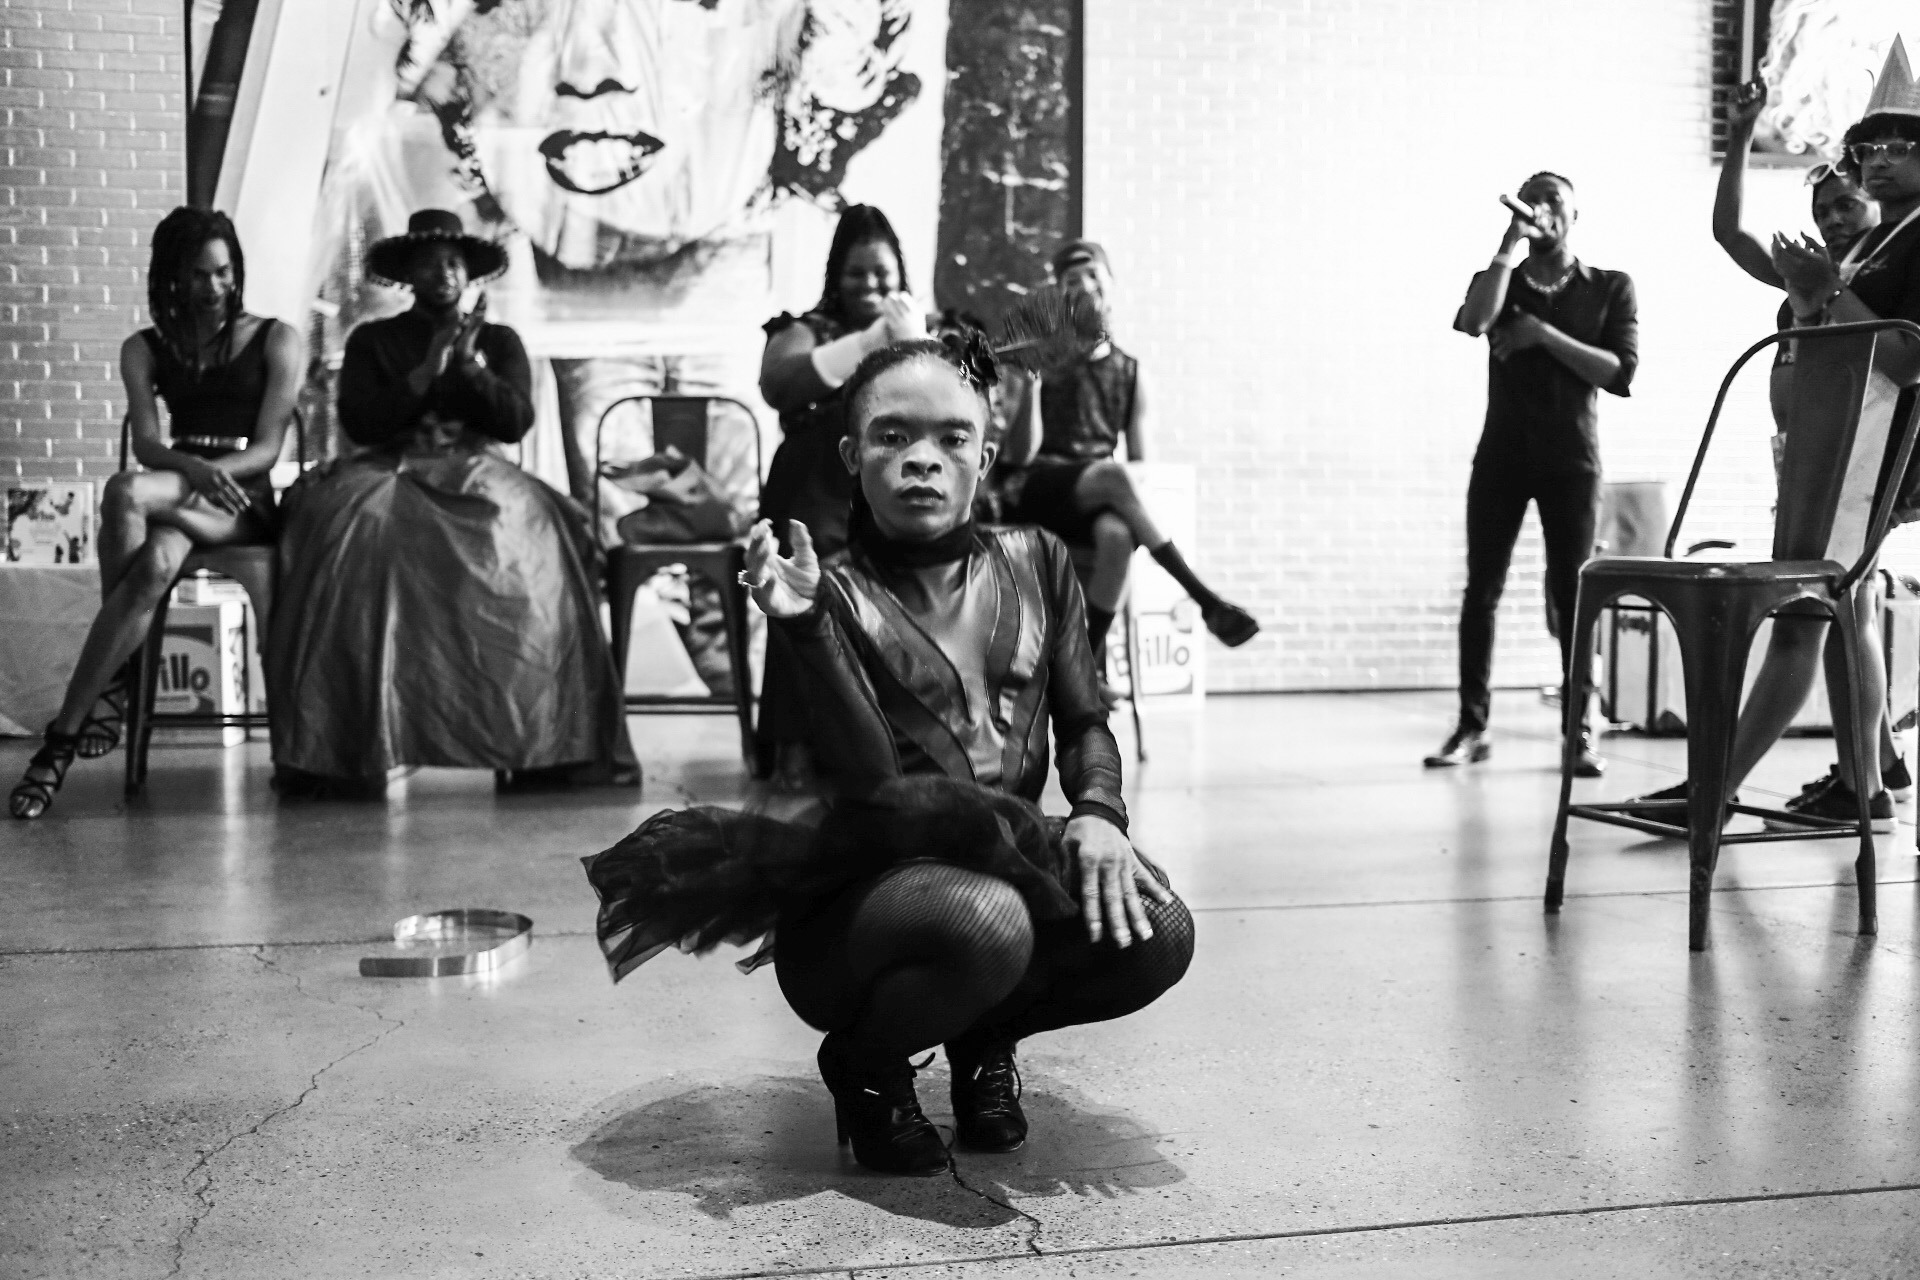 Vogue Excerpt at The Andy Warhol Museum. Featuring Tinky "Makavelli" Younger, Duane Binion, Matoka Winston, Dena Stanley, Julian mcClain, Malcolm Williams. Image by Unknown. Provided by True T.